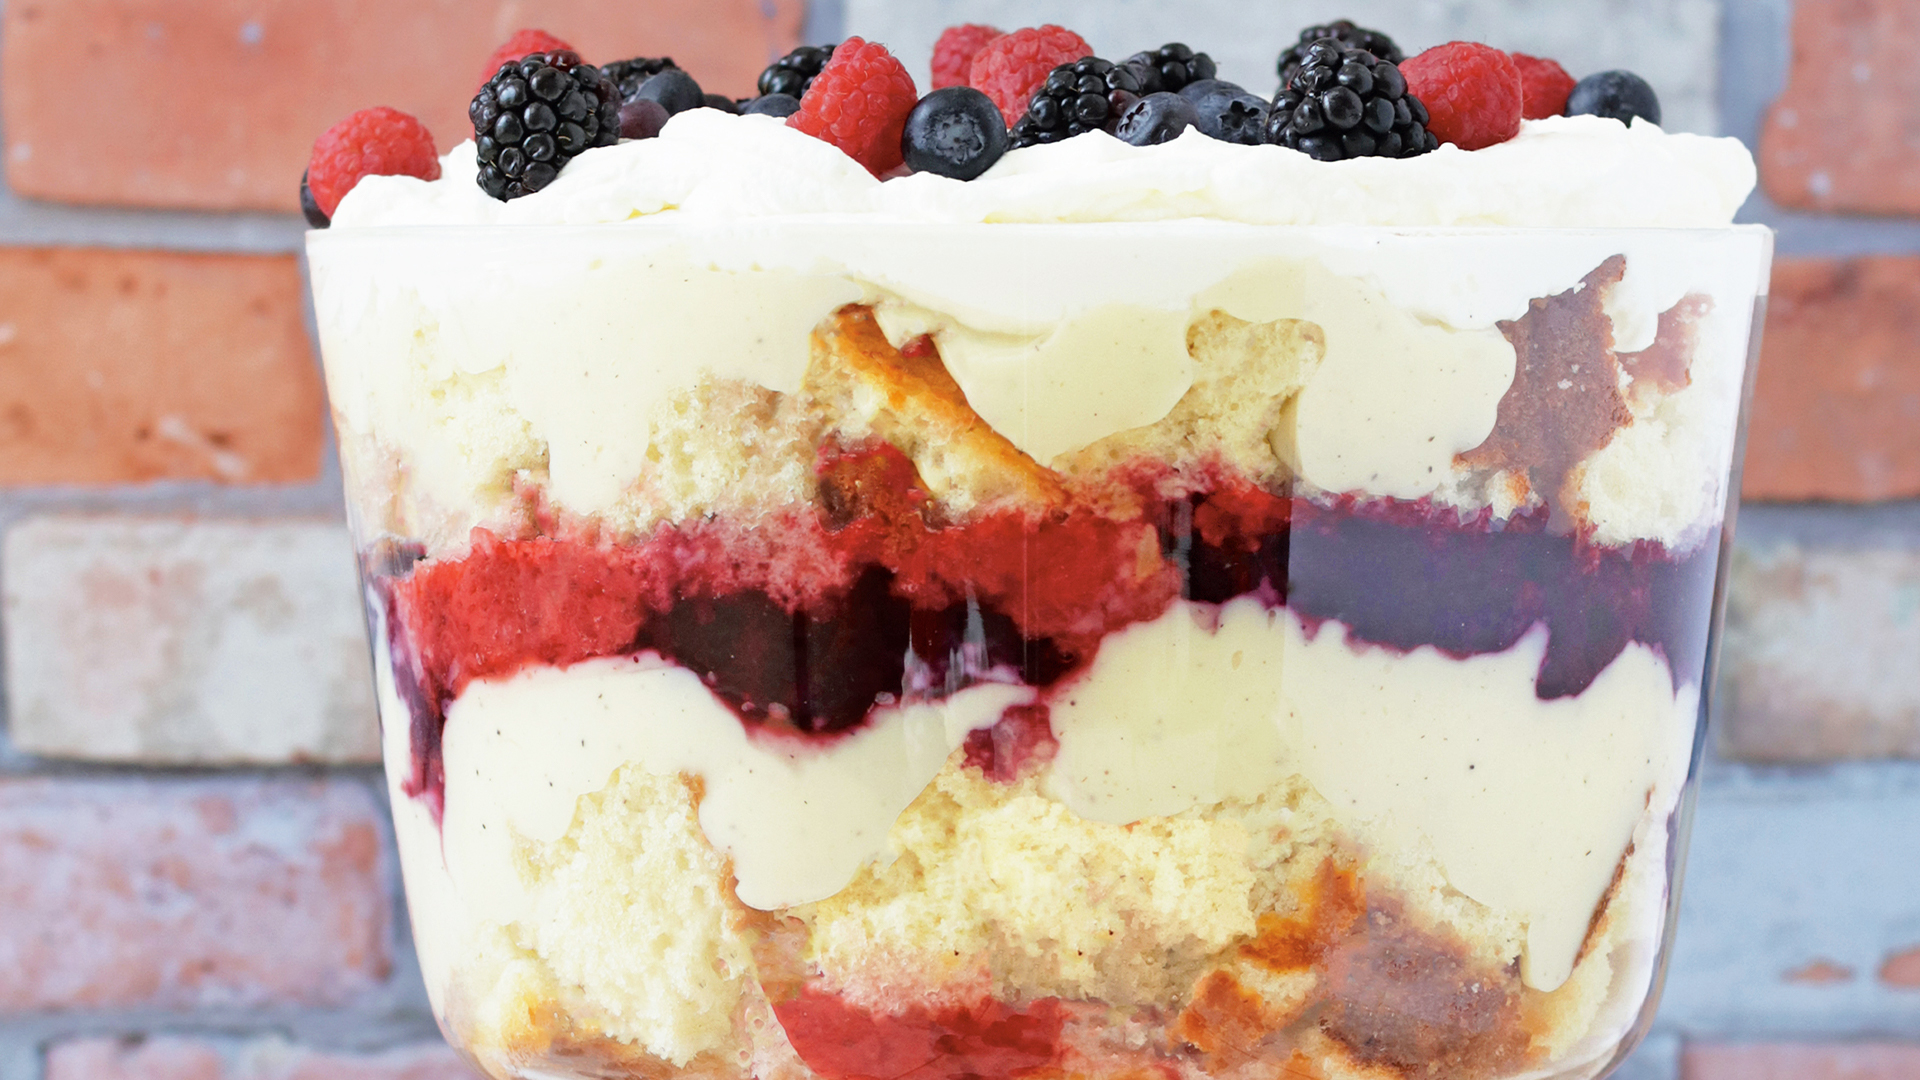 Summer berry trifle